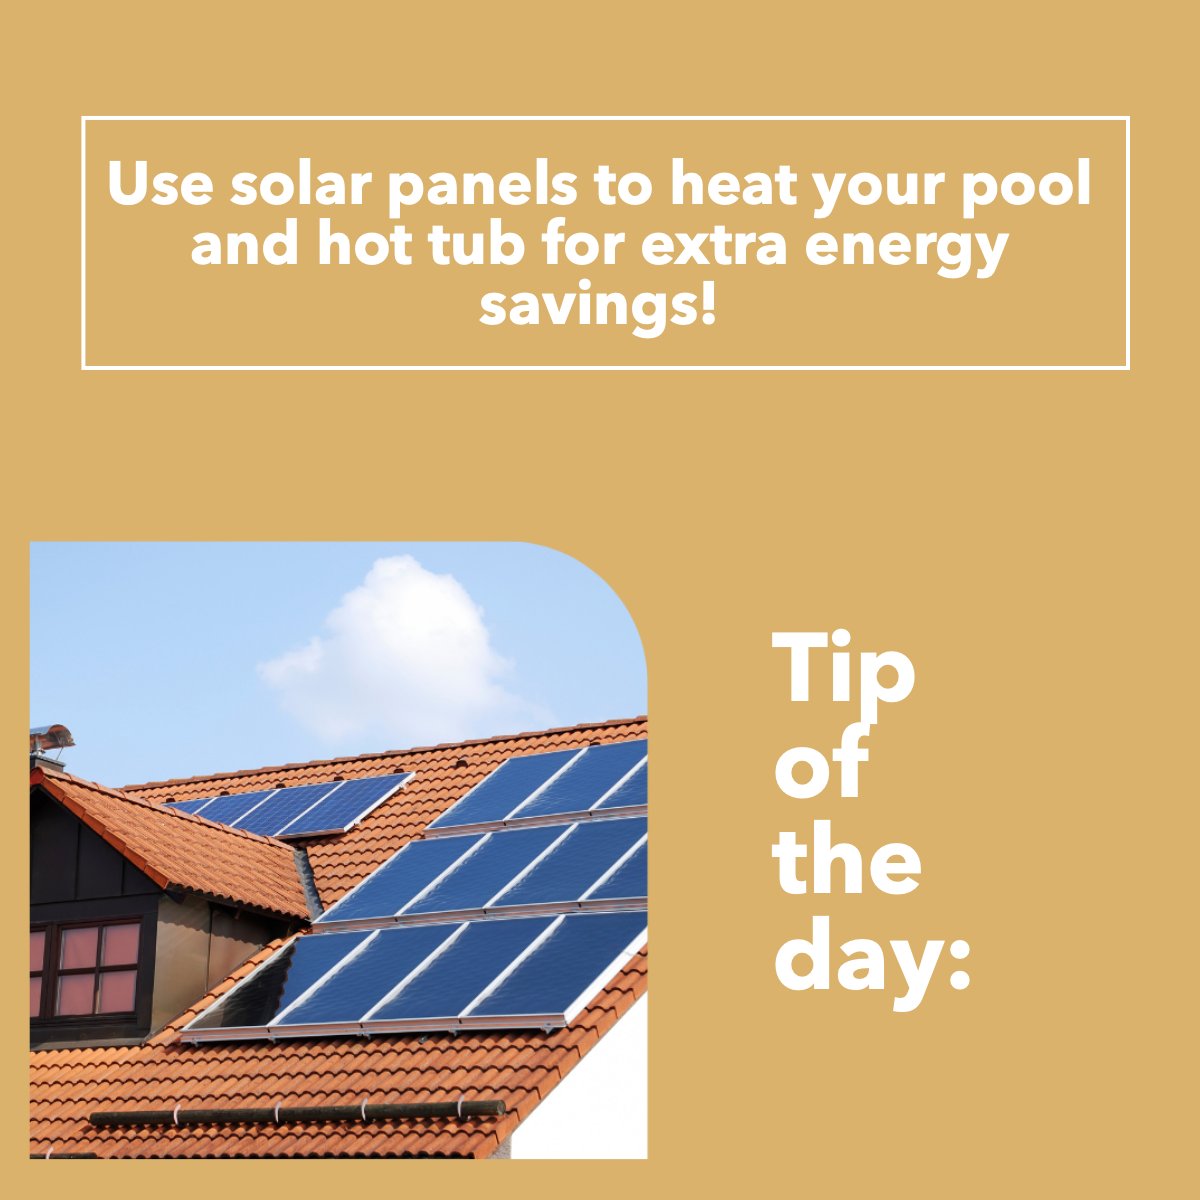 Check the tip of the day!! 💡 #solarpanels #realestatetipsoftheday #tipsoftheday